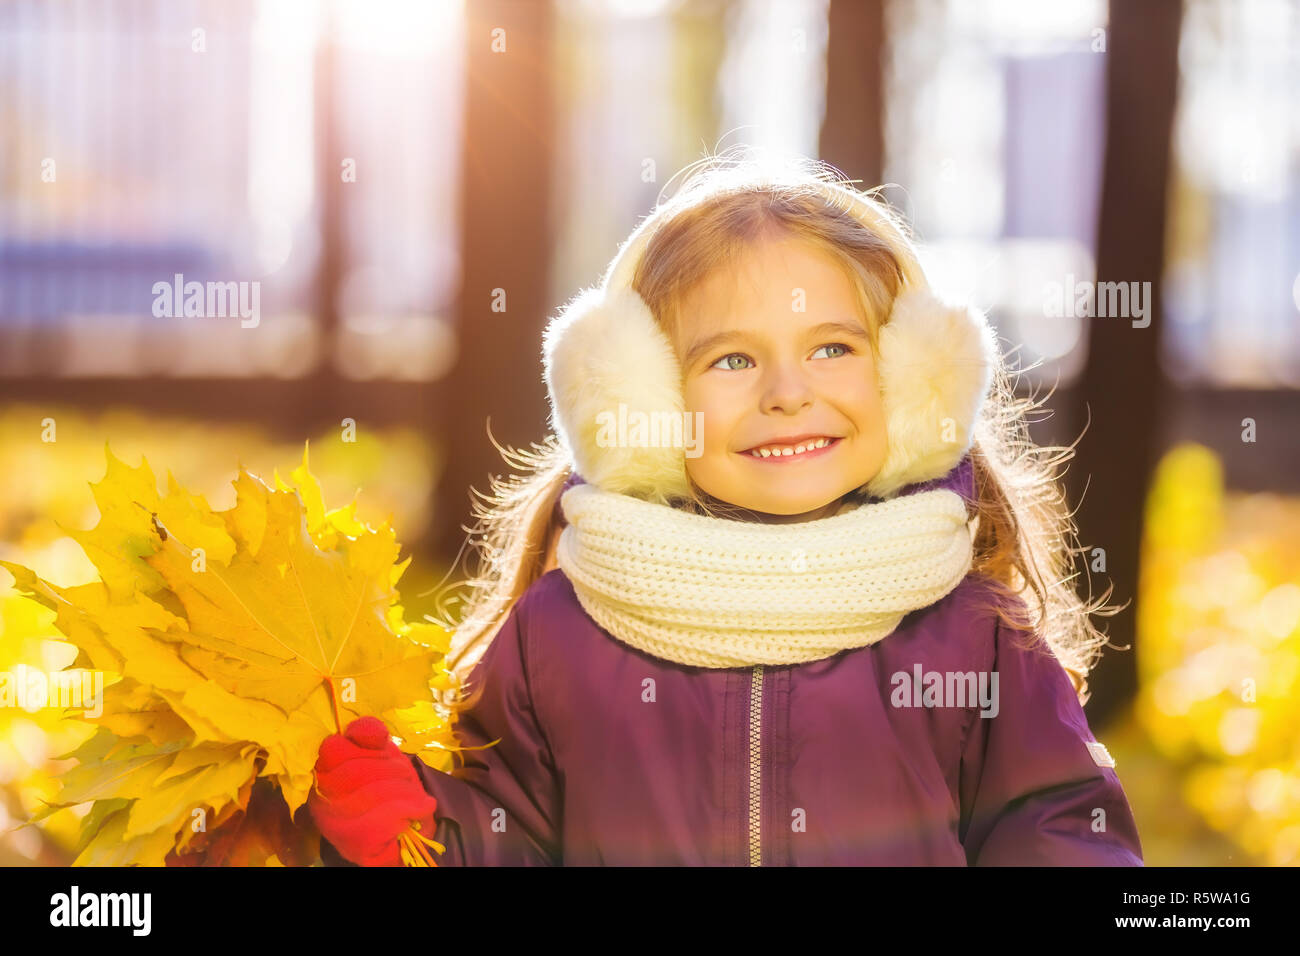 Happy little girl in earflaps with autumn leaves Stock Photo